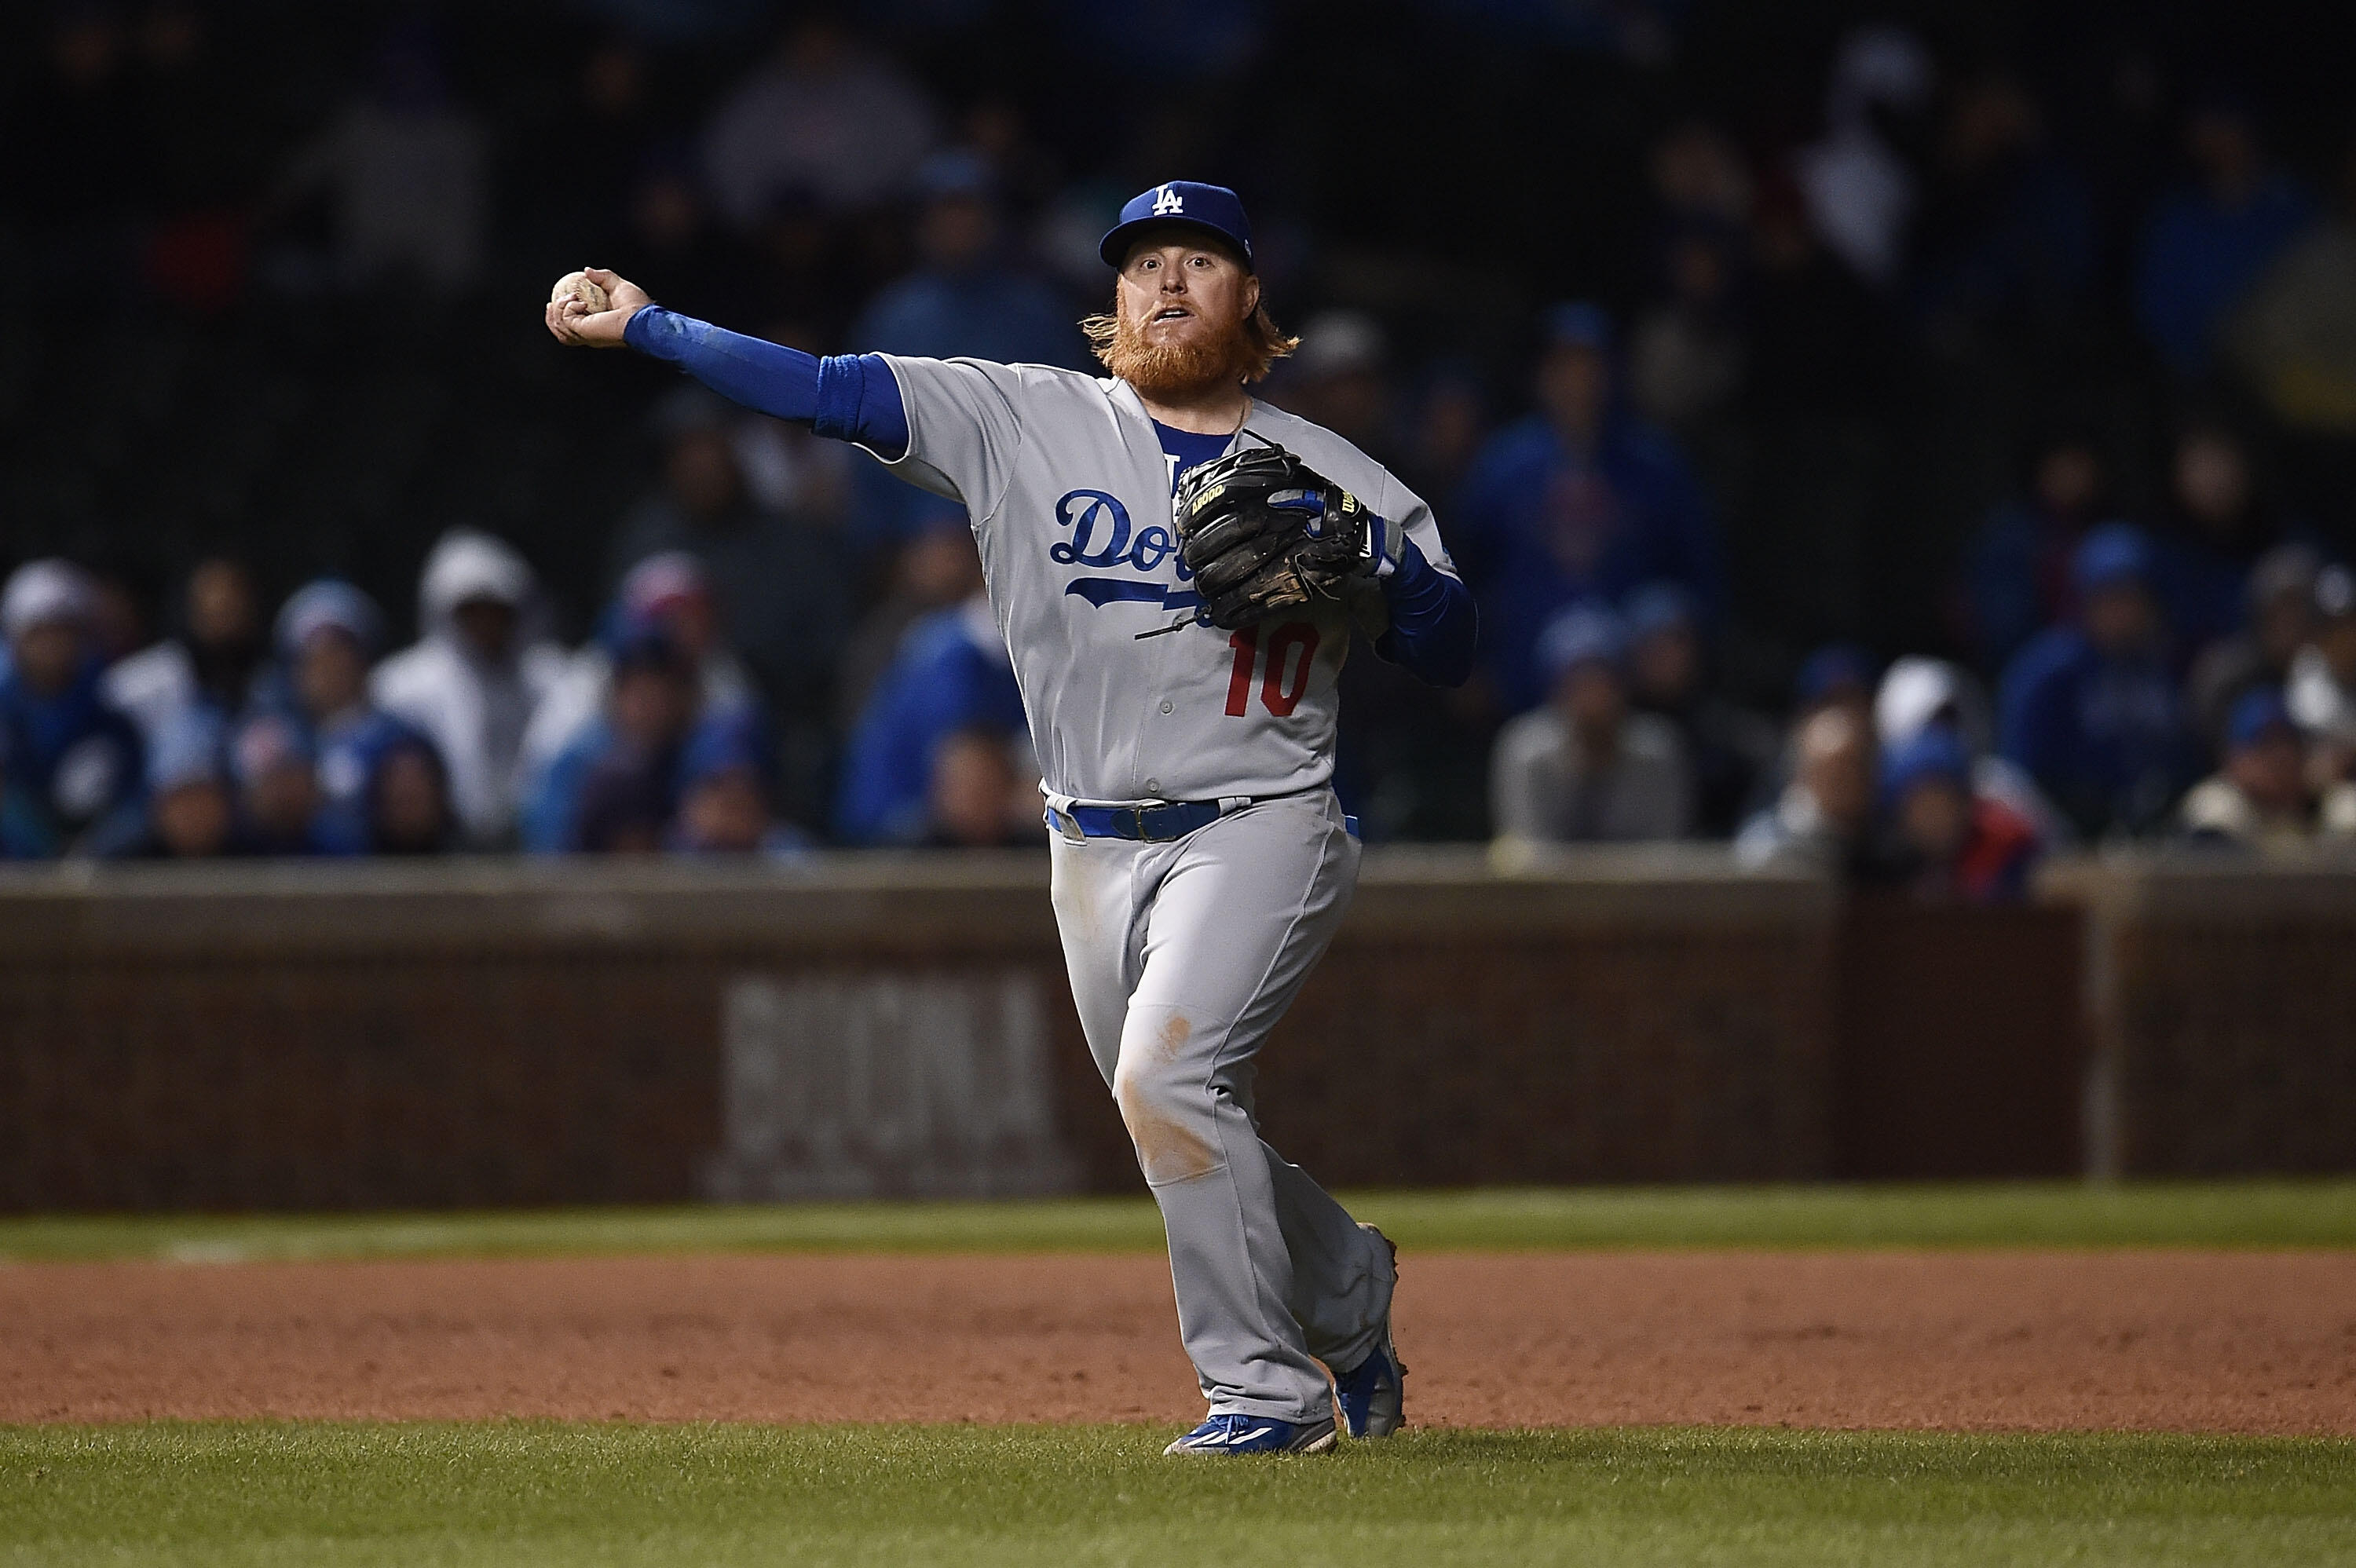 CHICAGO, IL - APRIL 10:  Justin Turner #10 of the Los Angeles Dodgers makes a throw to first base during the sixth inning of a game against the Chicago Cubs at Wrigley Field on April 10, 2017 in Chicago, Illinois.  (Photo by Stacy Revere/Getty Images)